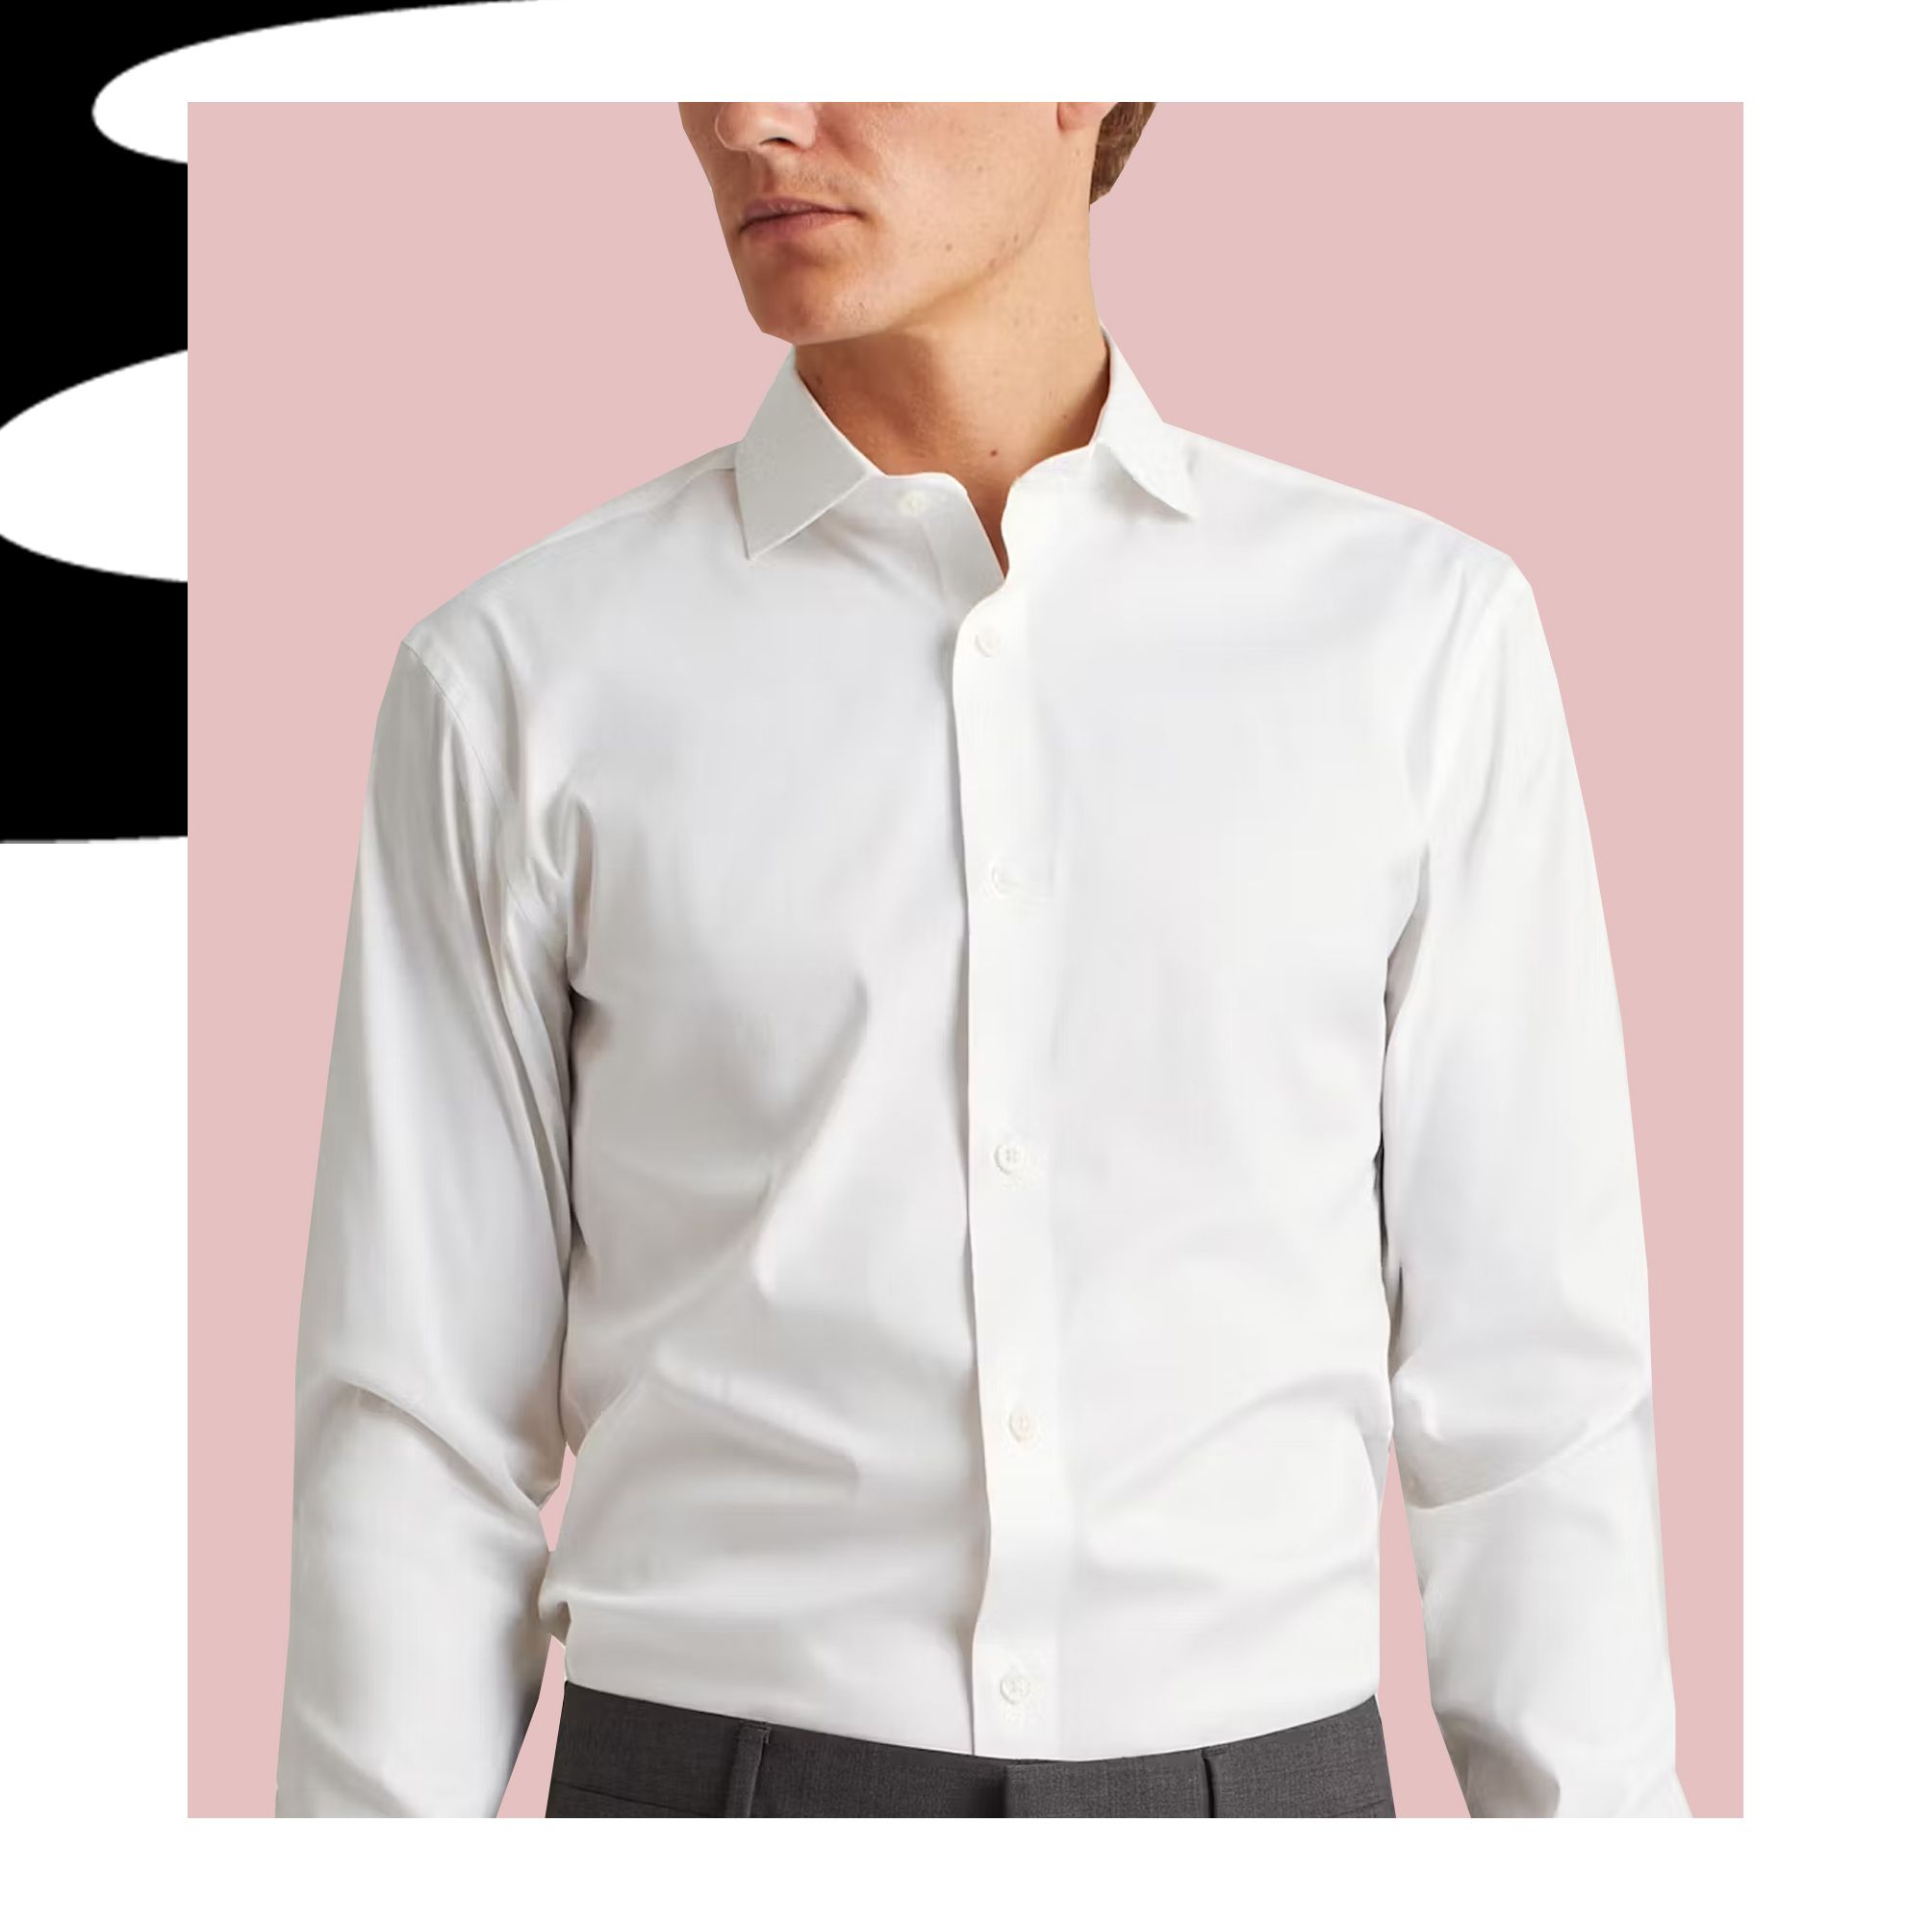 The 22 Best White Dress Shirts for Cleaning Up Nice